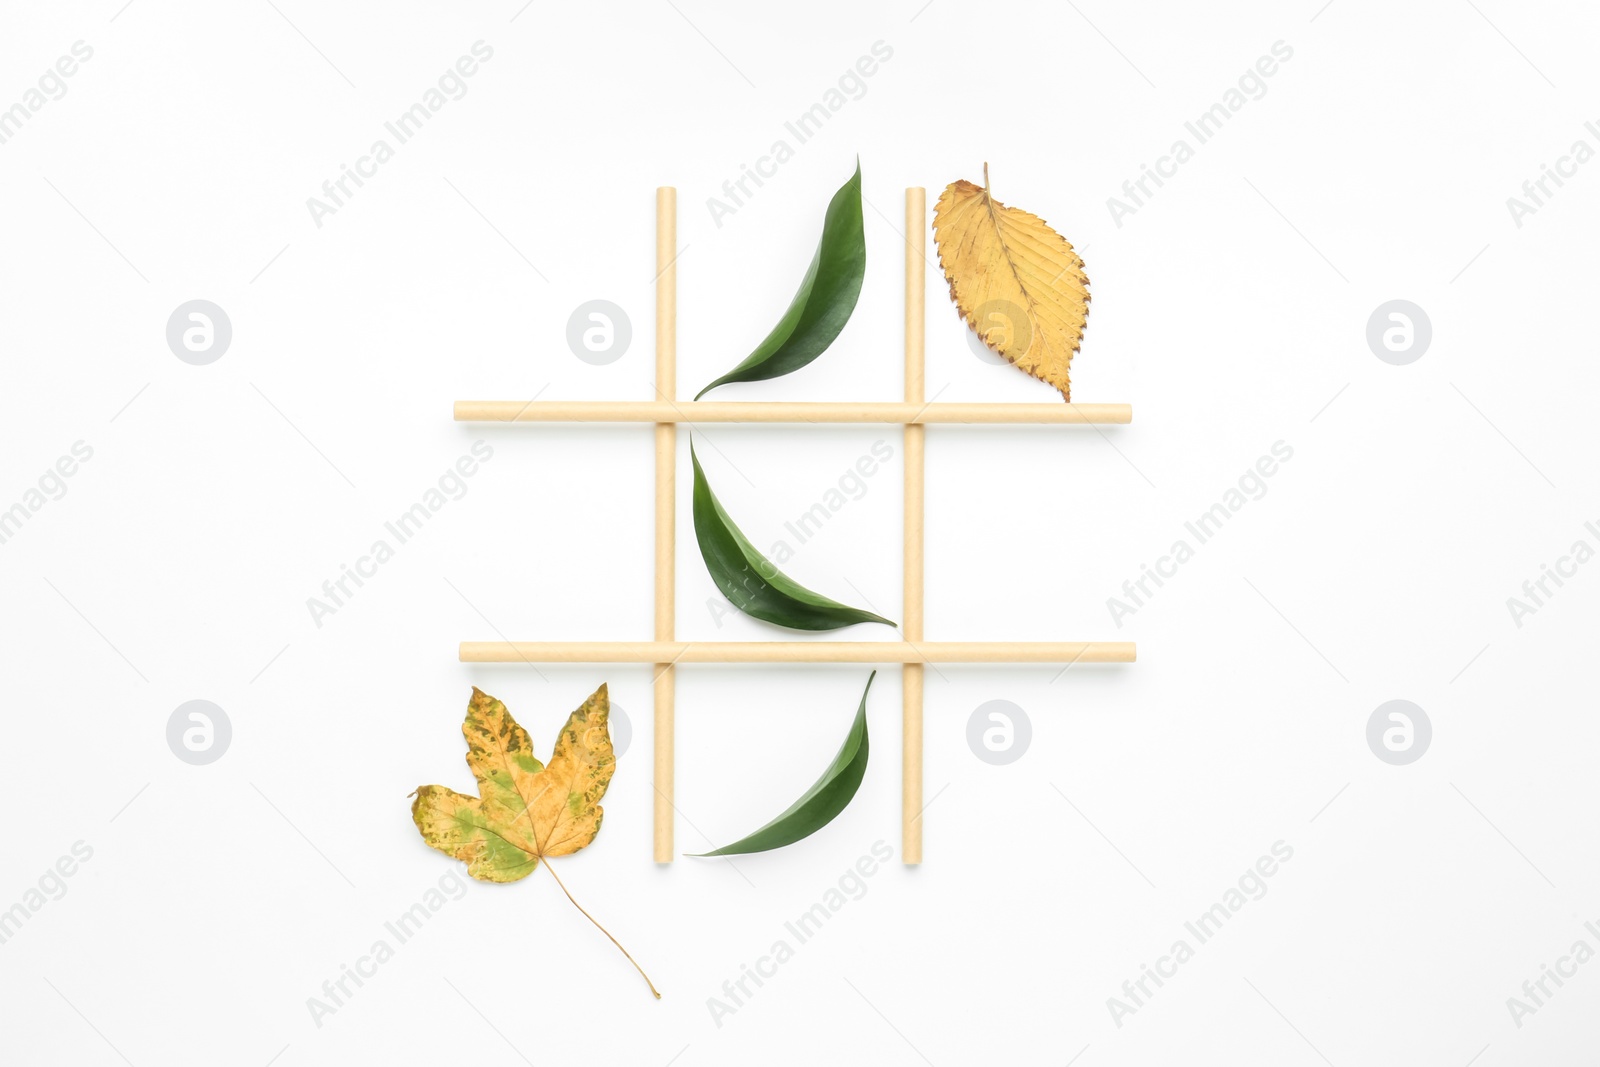 Photo of Tic tac toe game made with fresh and dry leaves on white background, top view